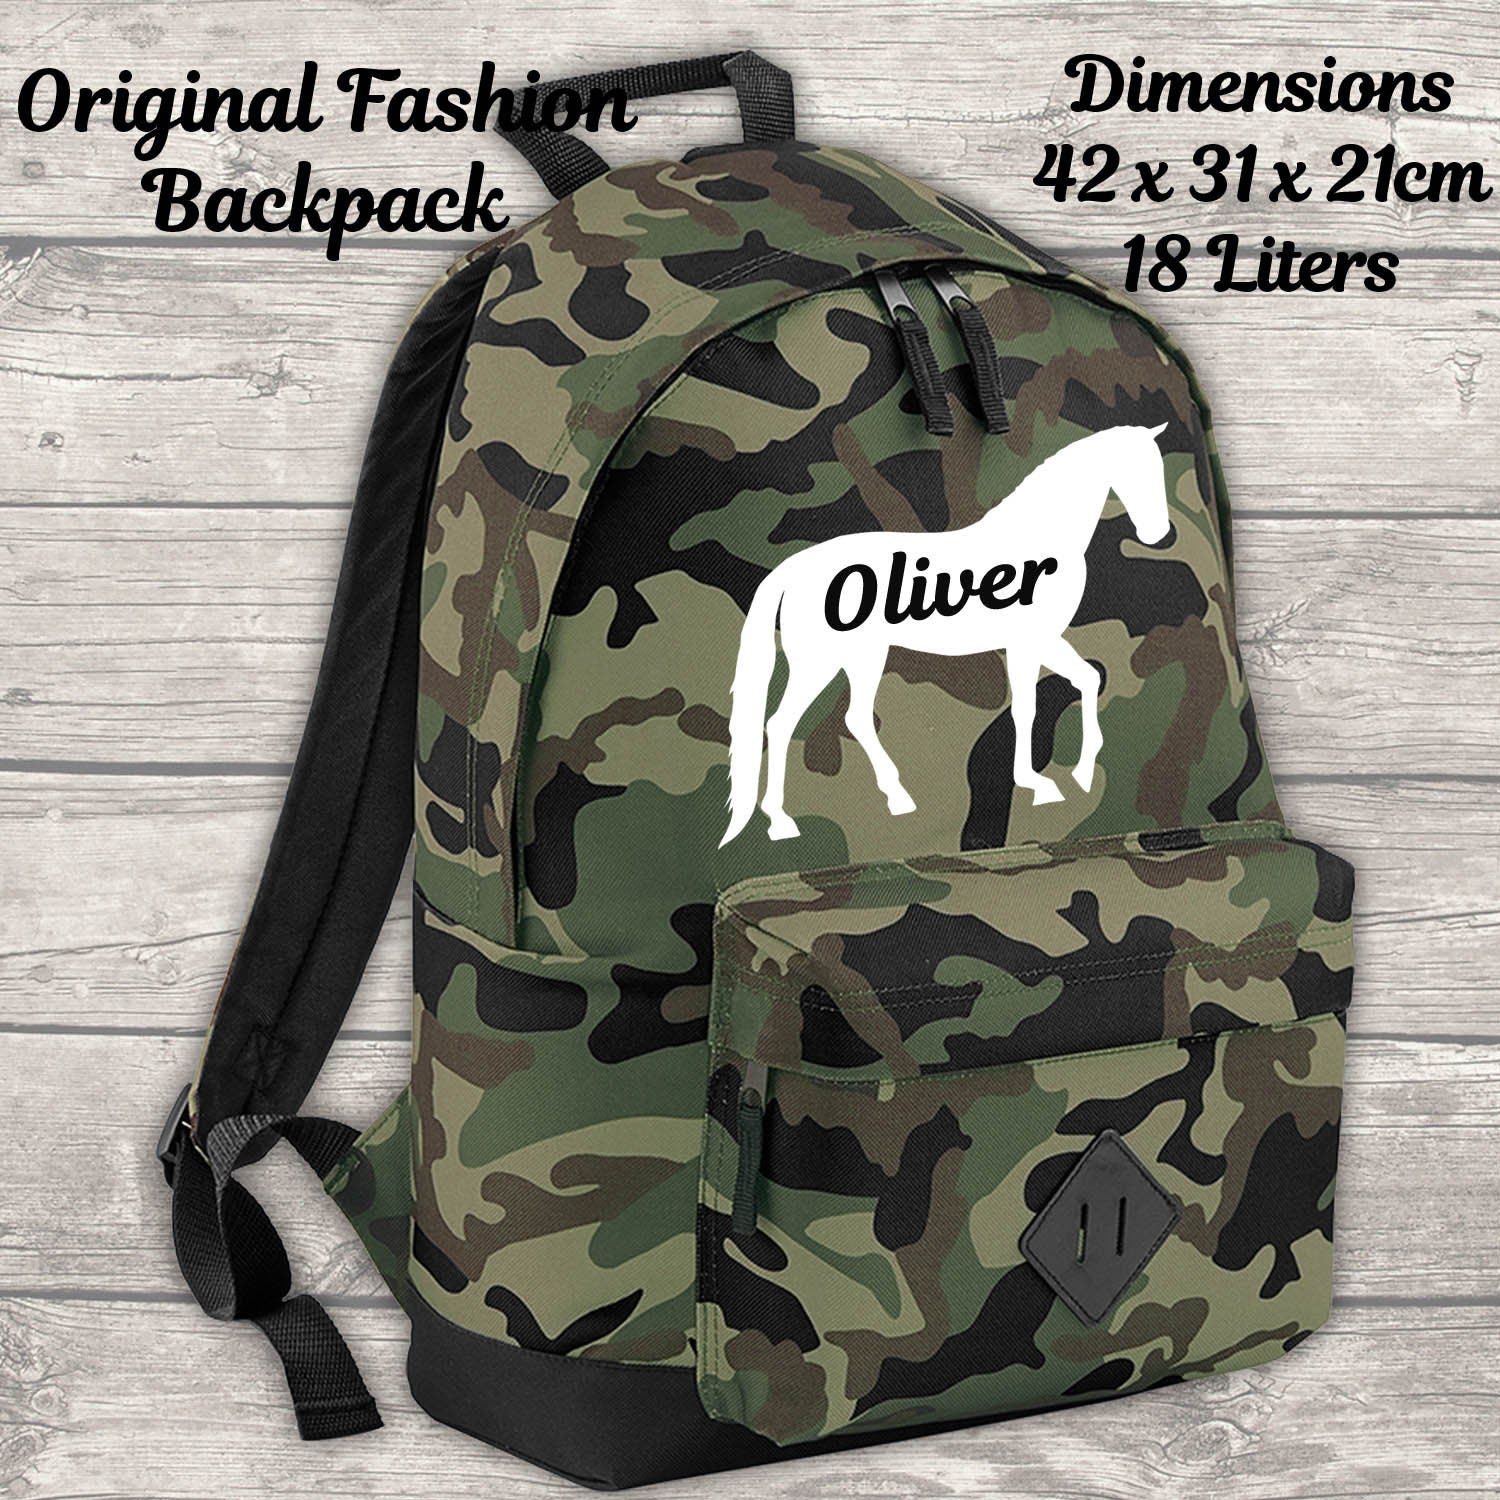 Camo Dinosaur Backpack Personalized Camouflage Backpack 